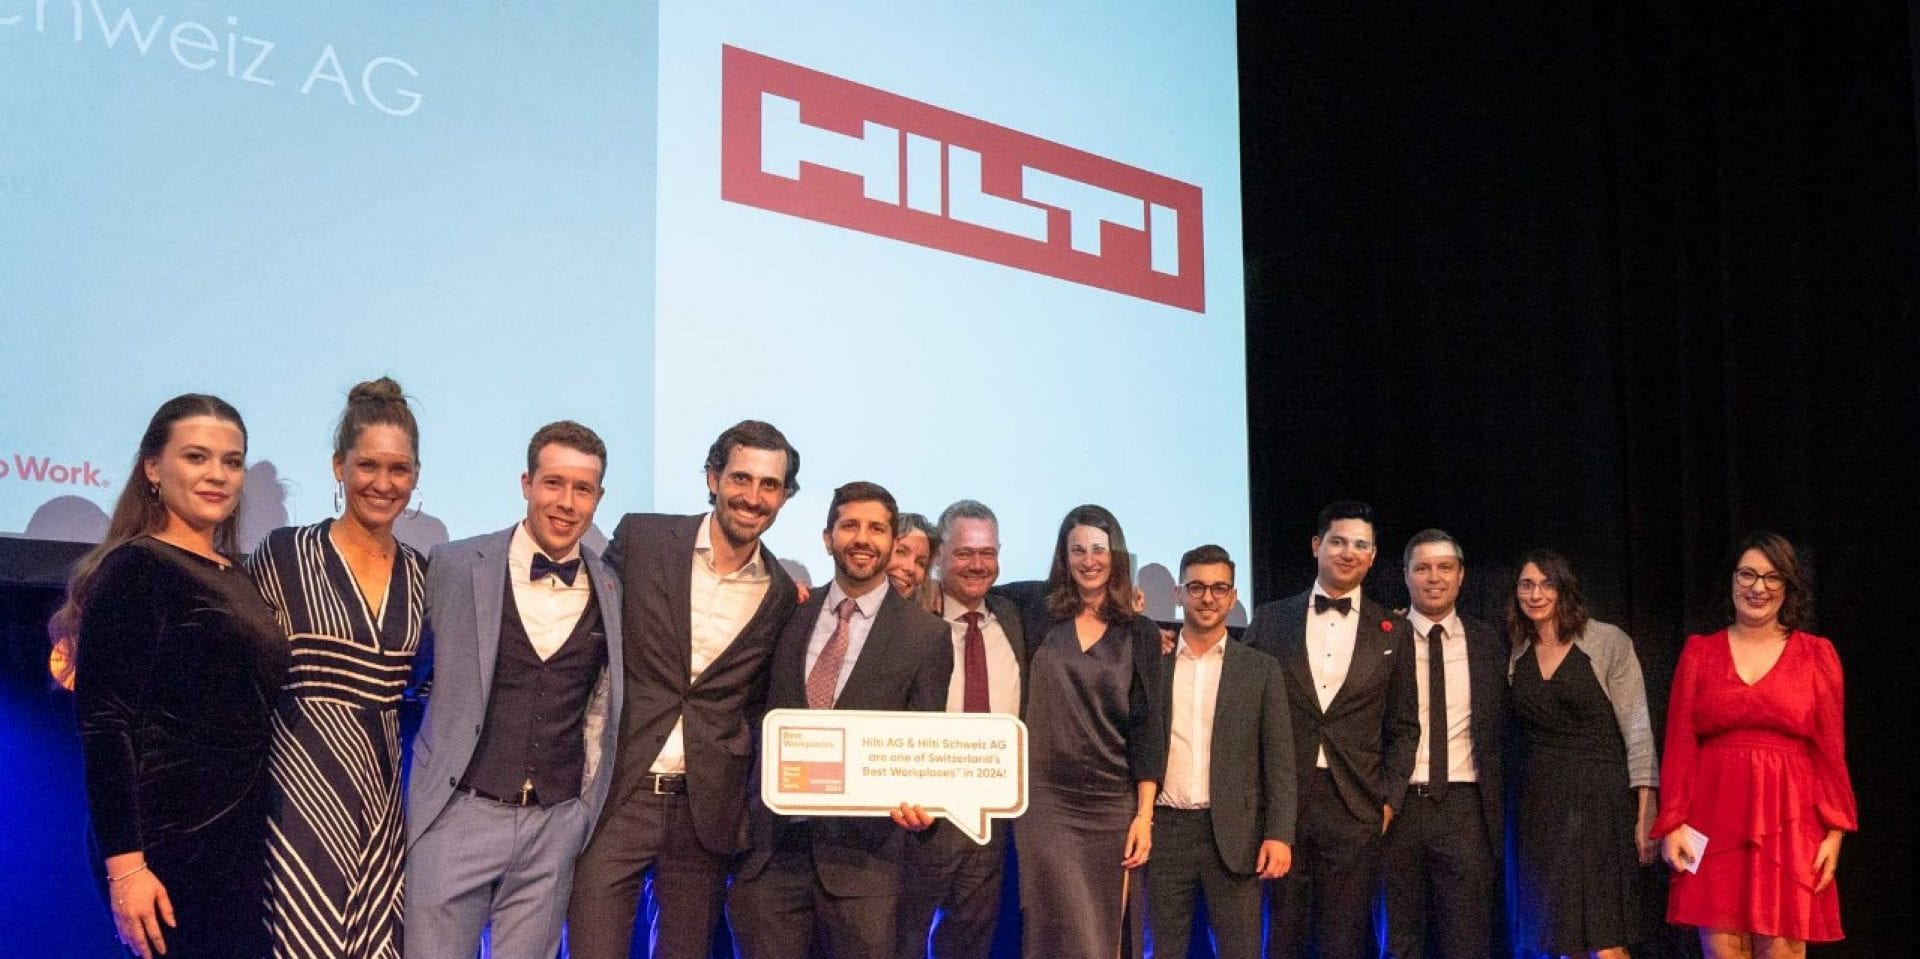 Hilti Recognized as Best Employer